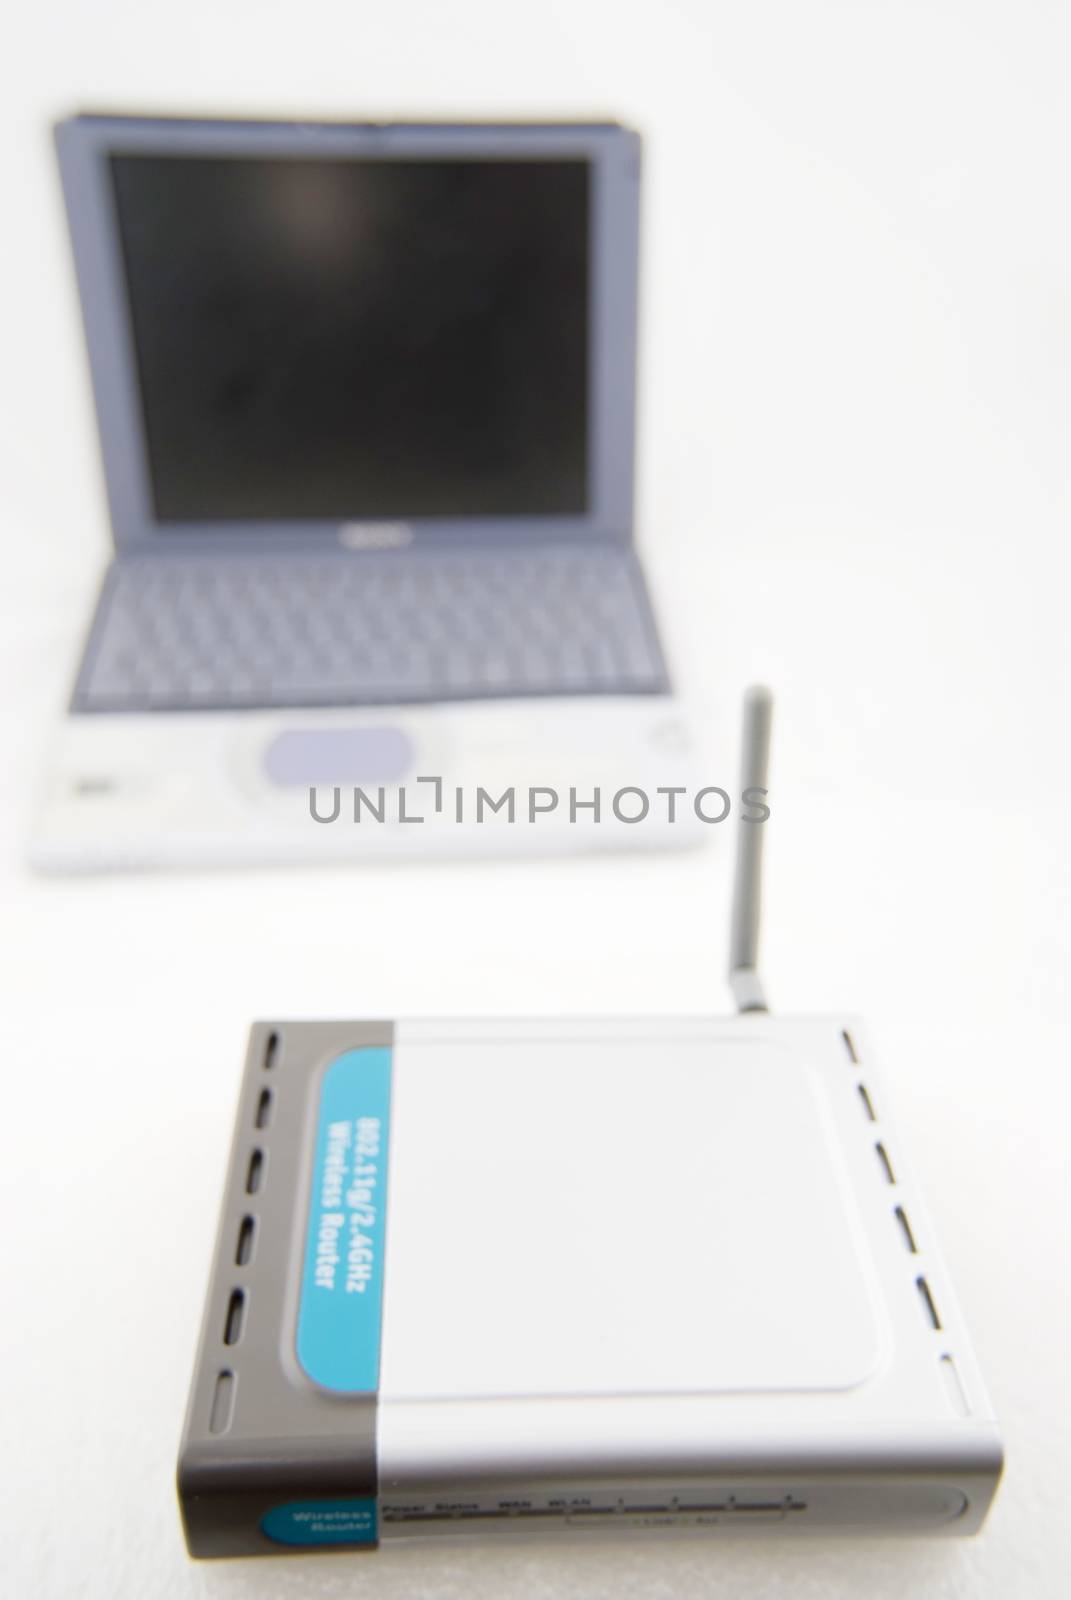 Silver Laptop and wireless router by seawaters